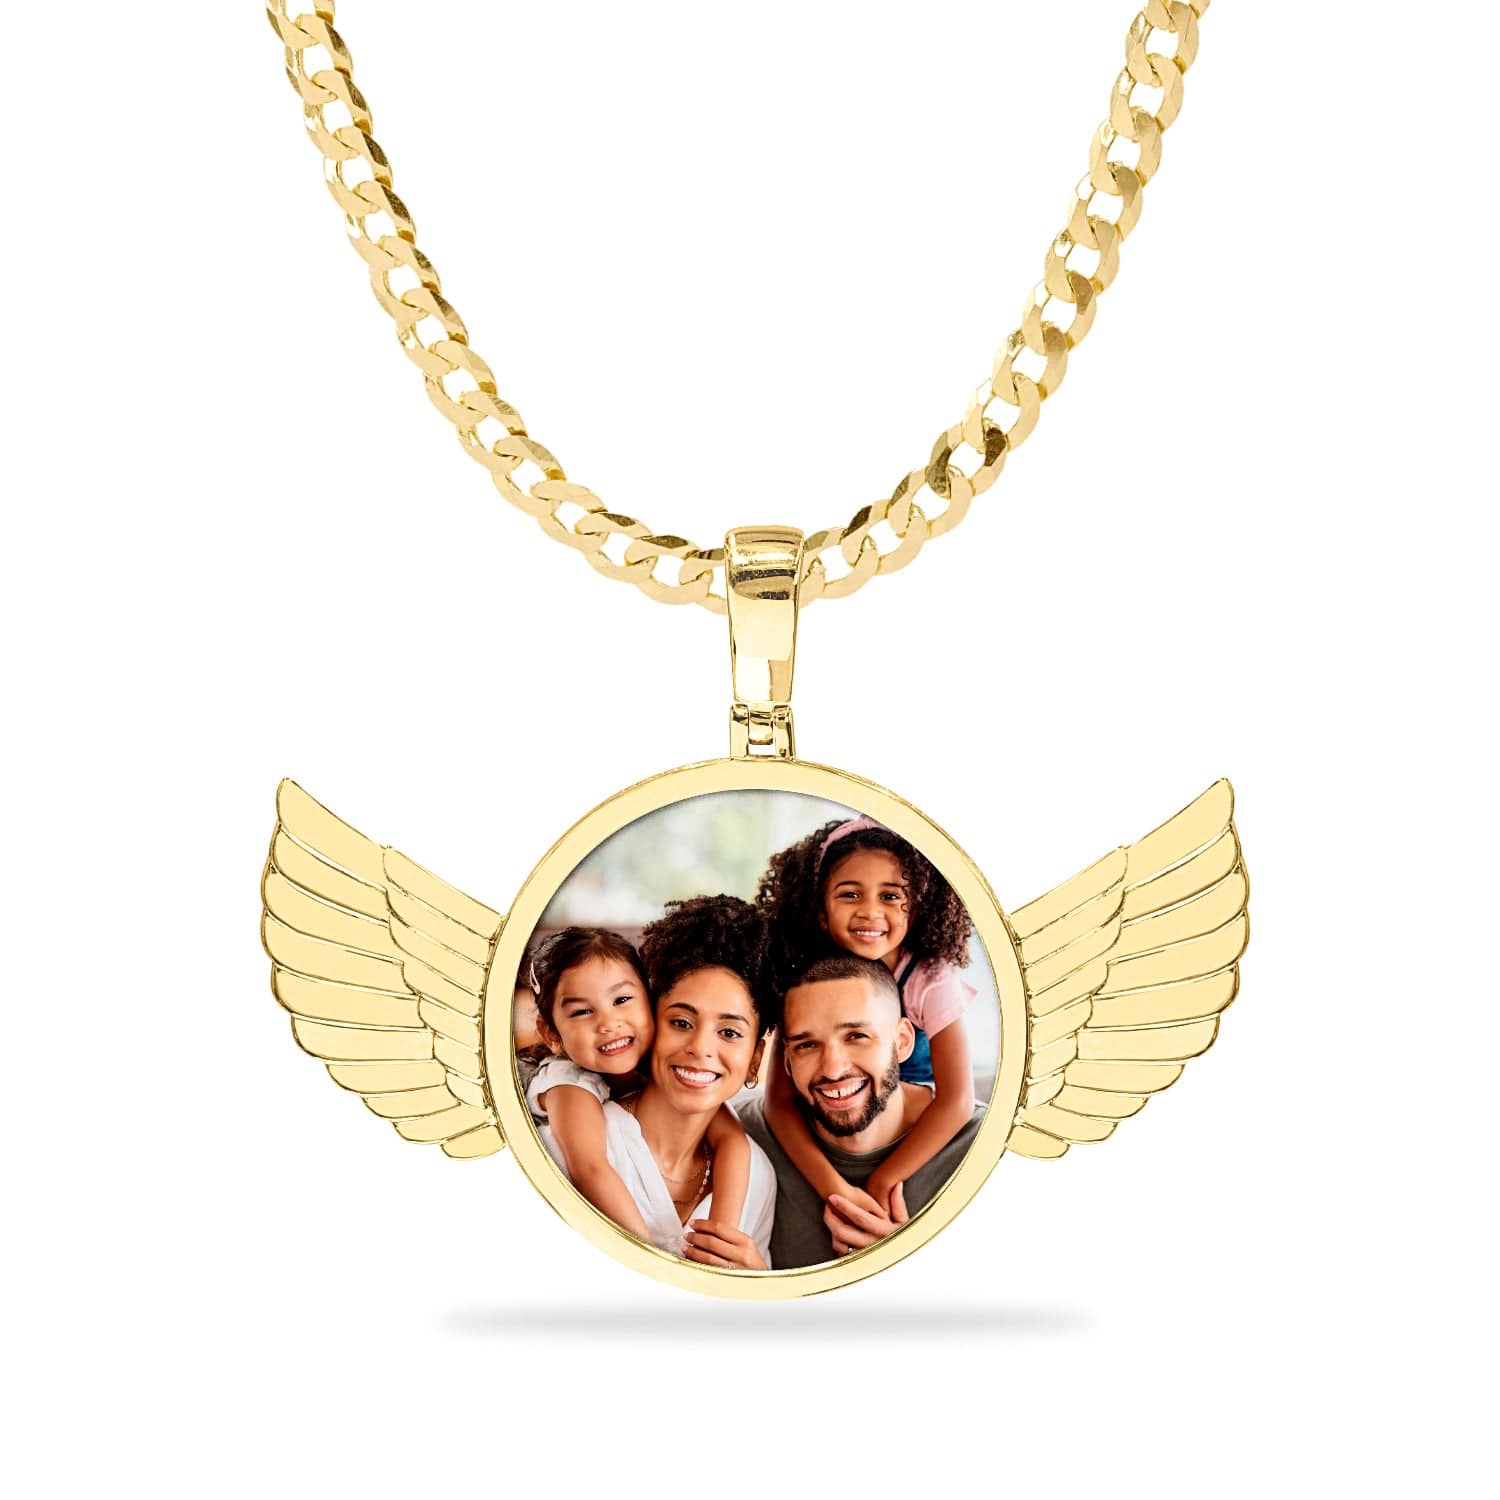 14k Gold over Sterling Silver / Cuban Chain High Polished Round Photo Pendant with Wings